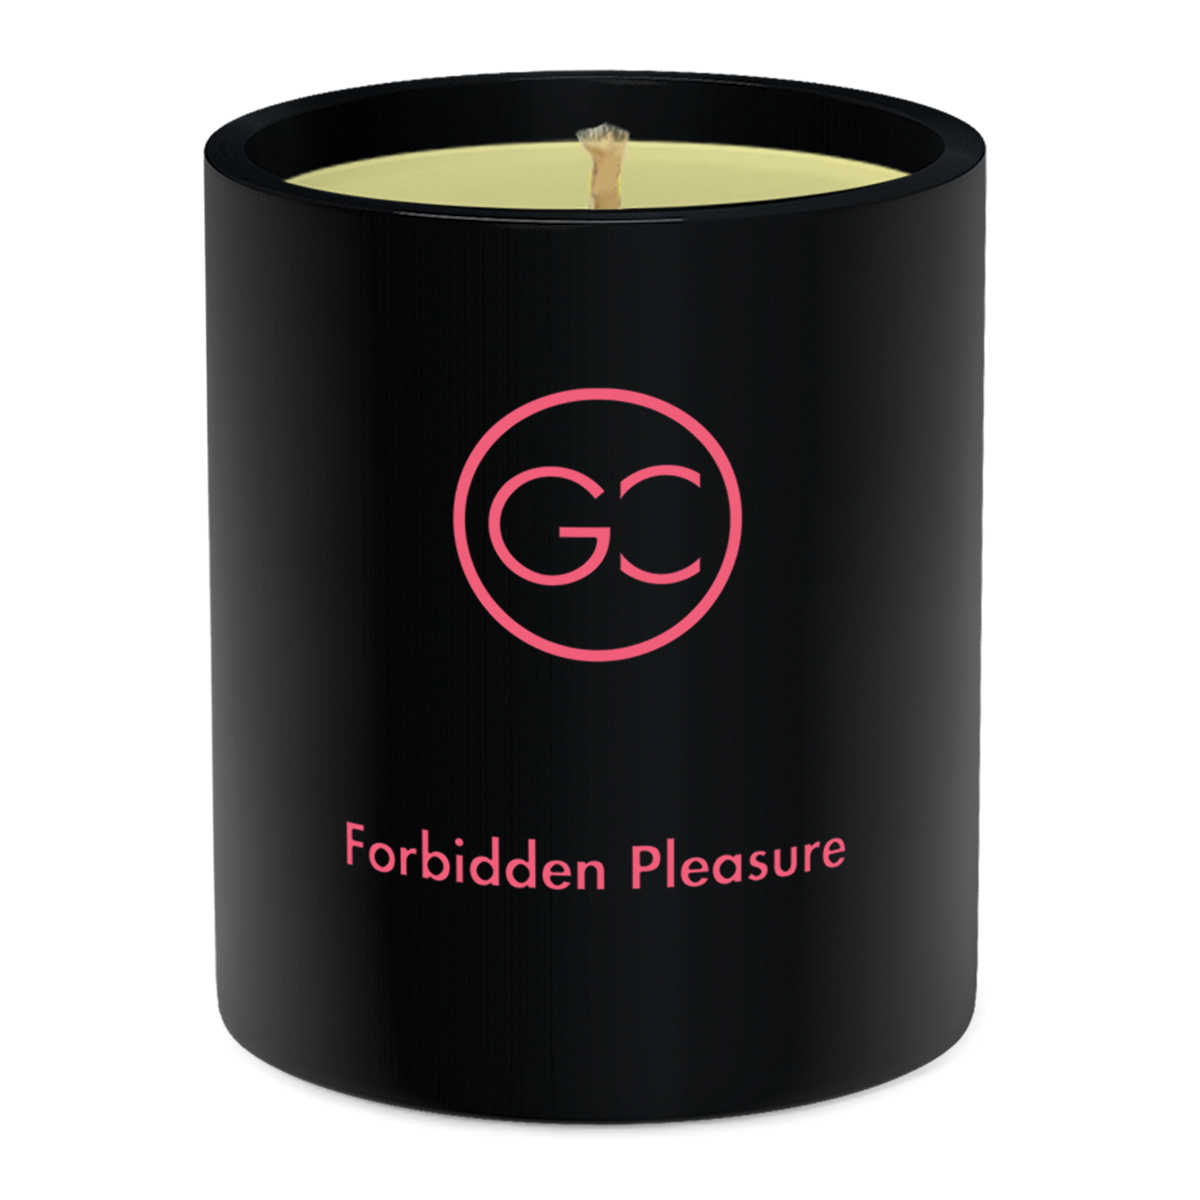 Forbidden Pleasure - Marshmallow Scented Soy Candle 55hr Burn